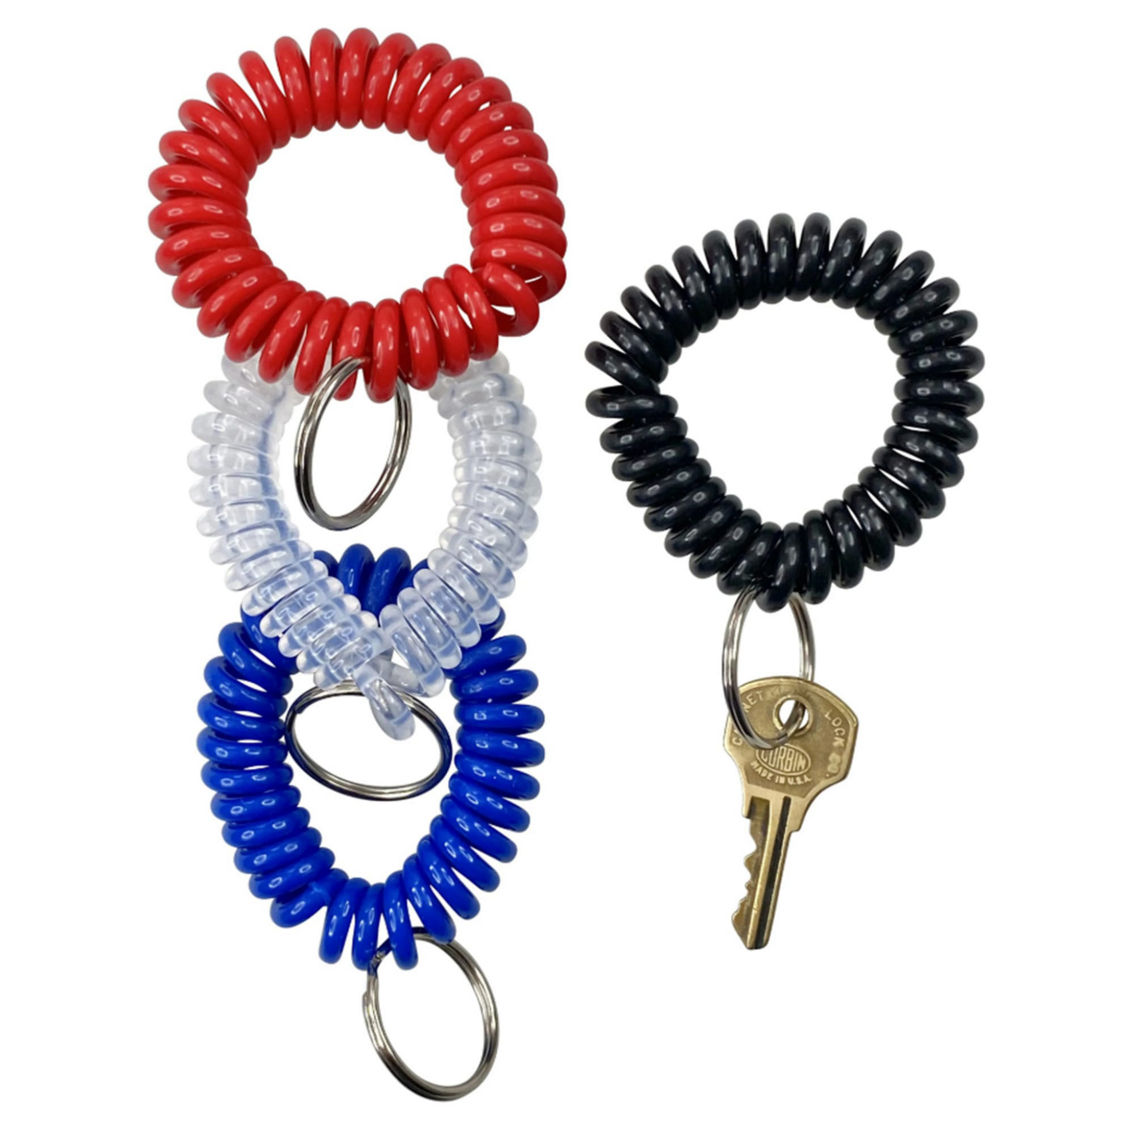 Baumgartens Wrist Coil Key Chain, Pack of 10 - Image 3 of 4